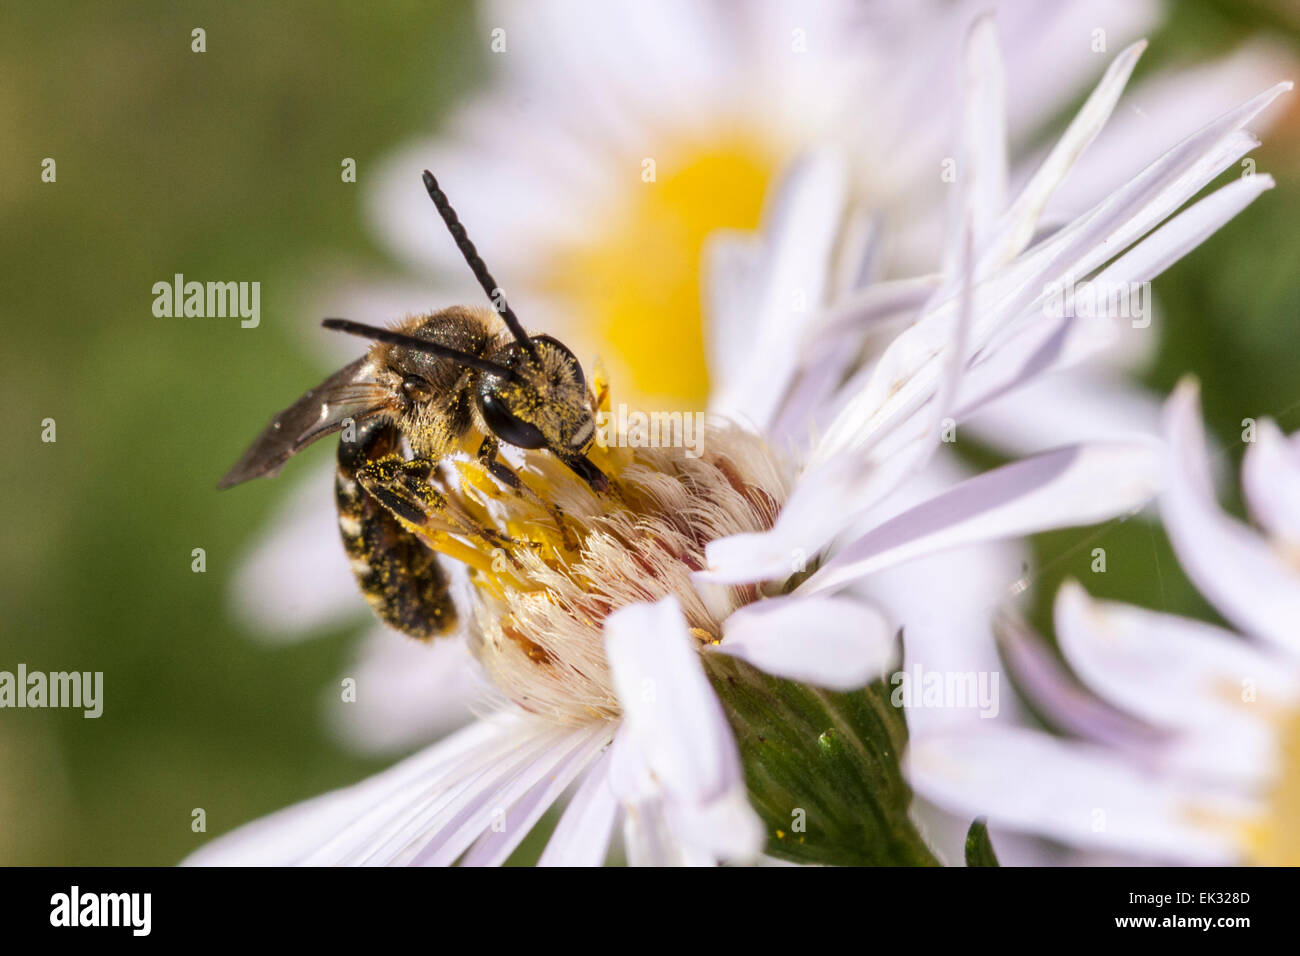 Slender Mining Bee (solitary bee - lasioglossum calceatum) on an Aster flower in the sun. Stock Photo